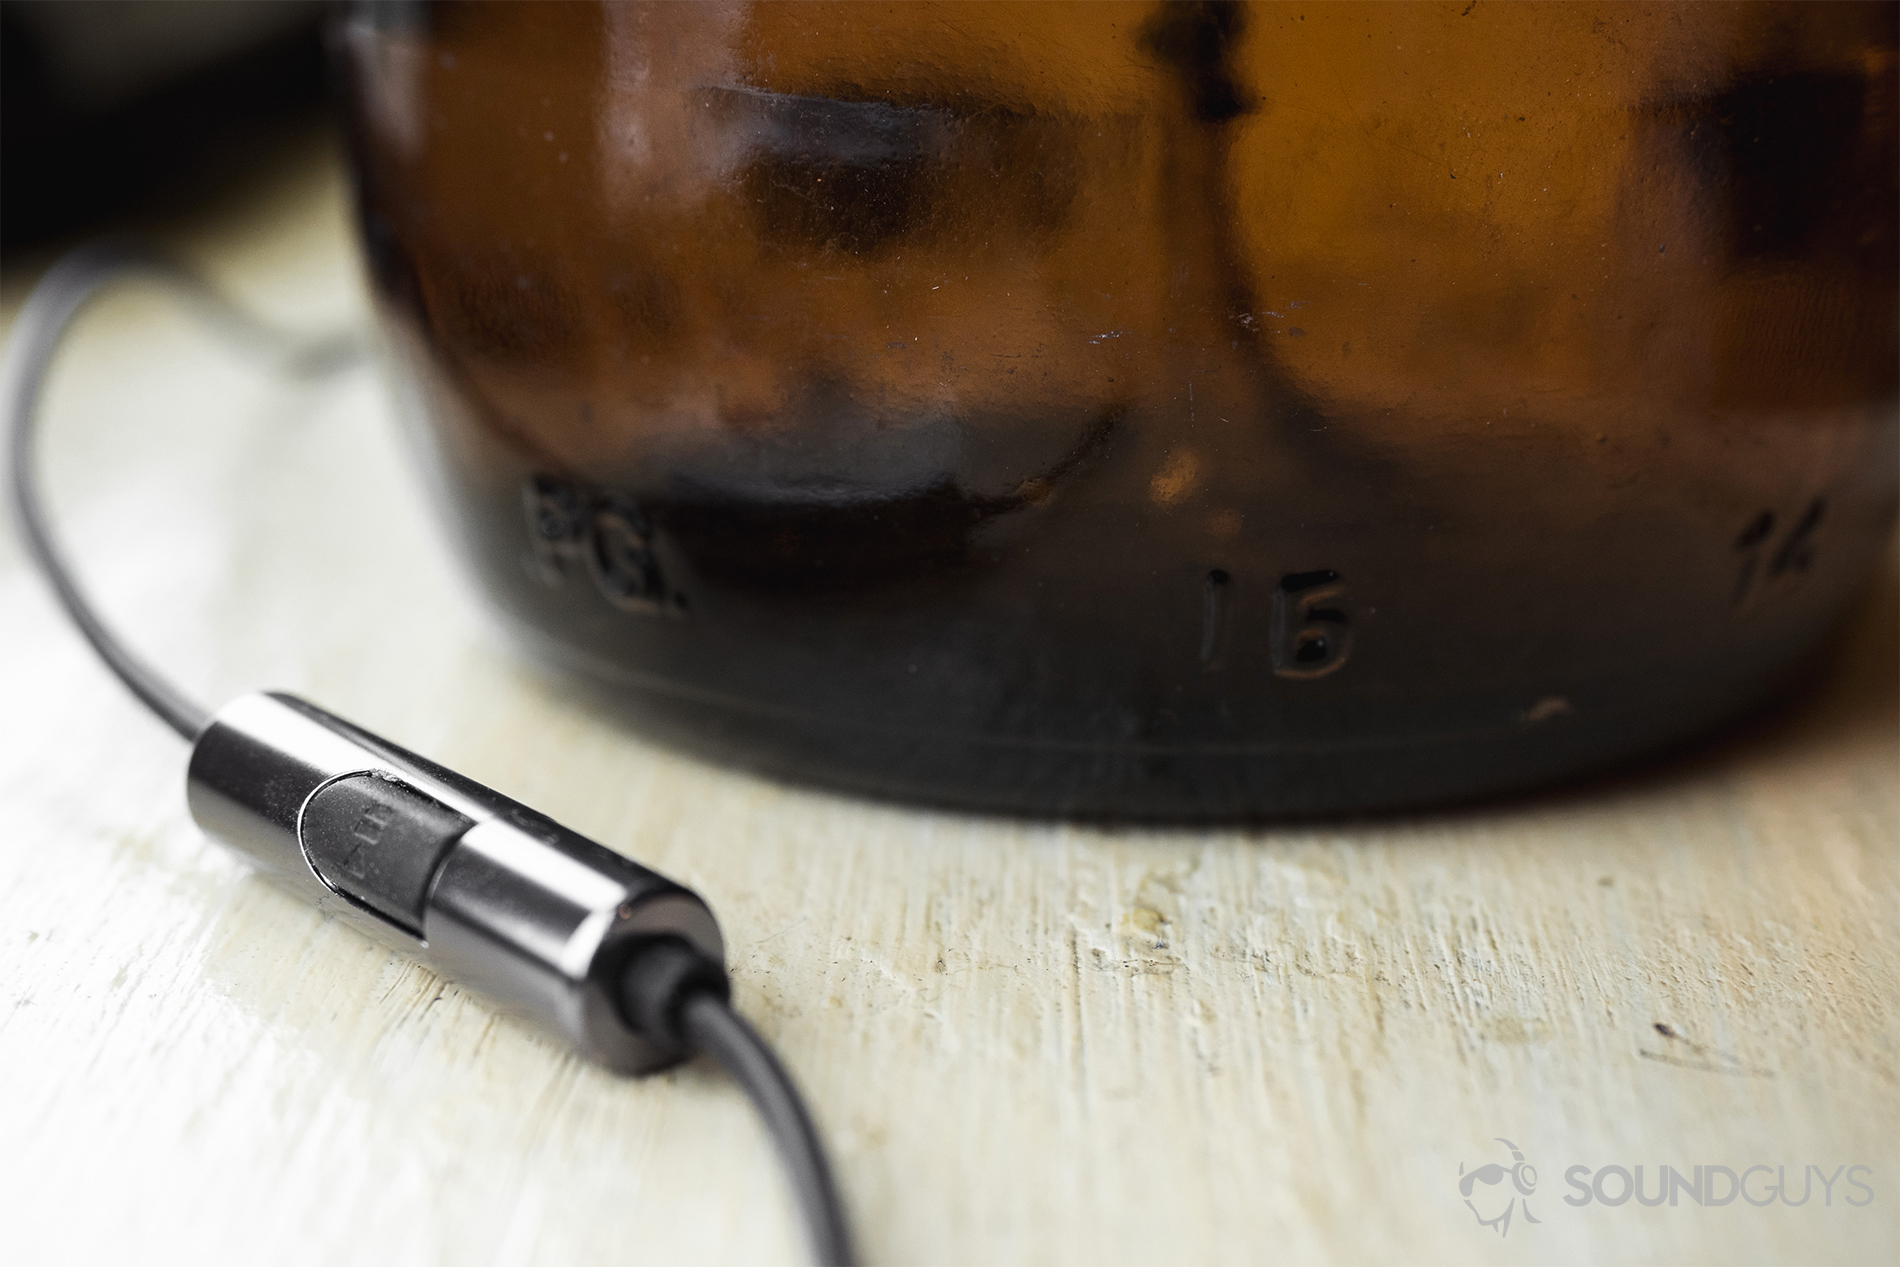 Thinksound ts03+mic review: A close-up of the mic/remote in front of a dark brown glass bottle.